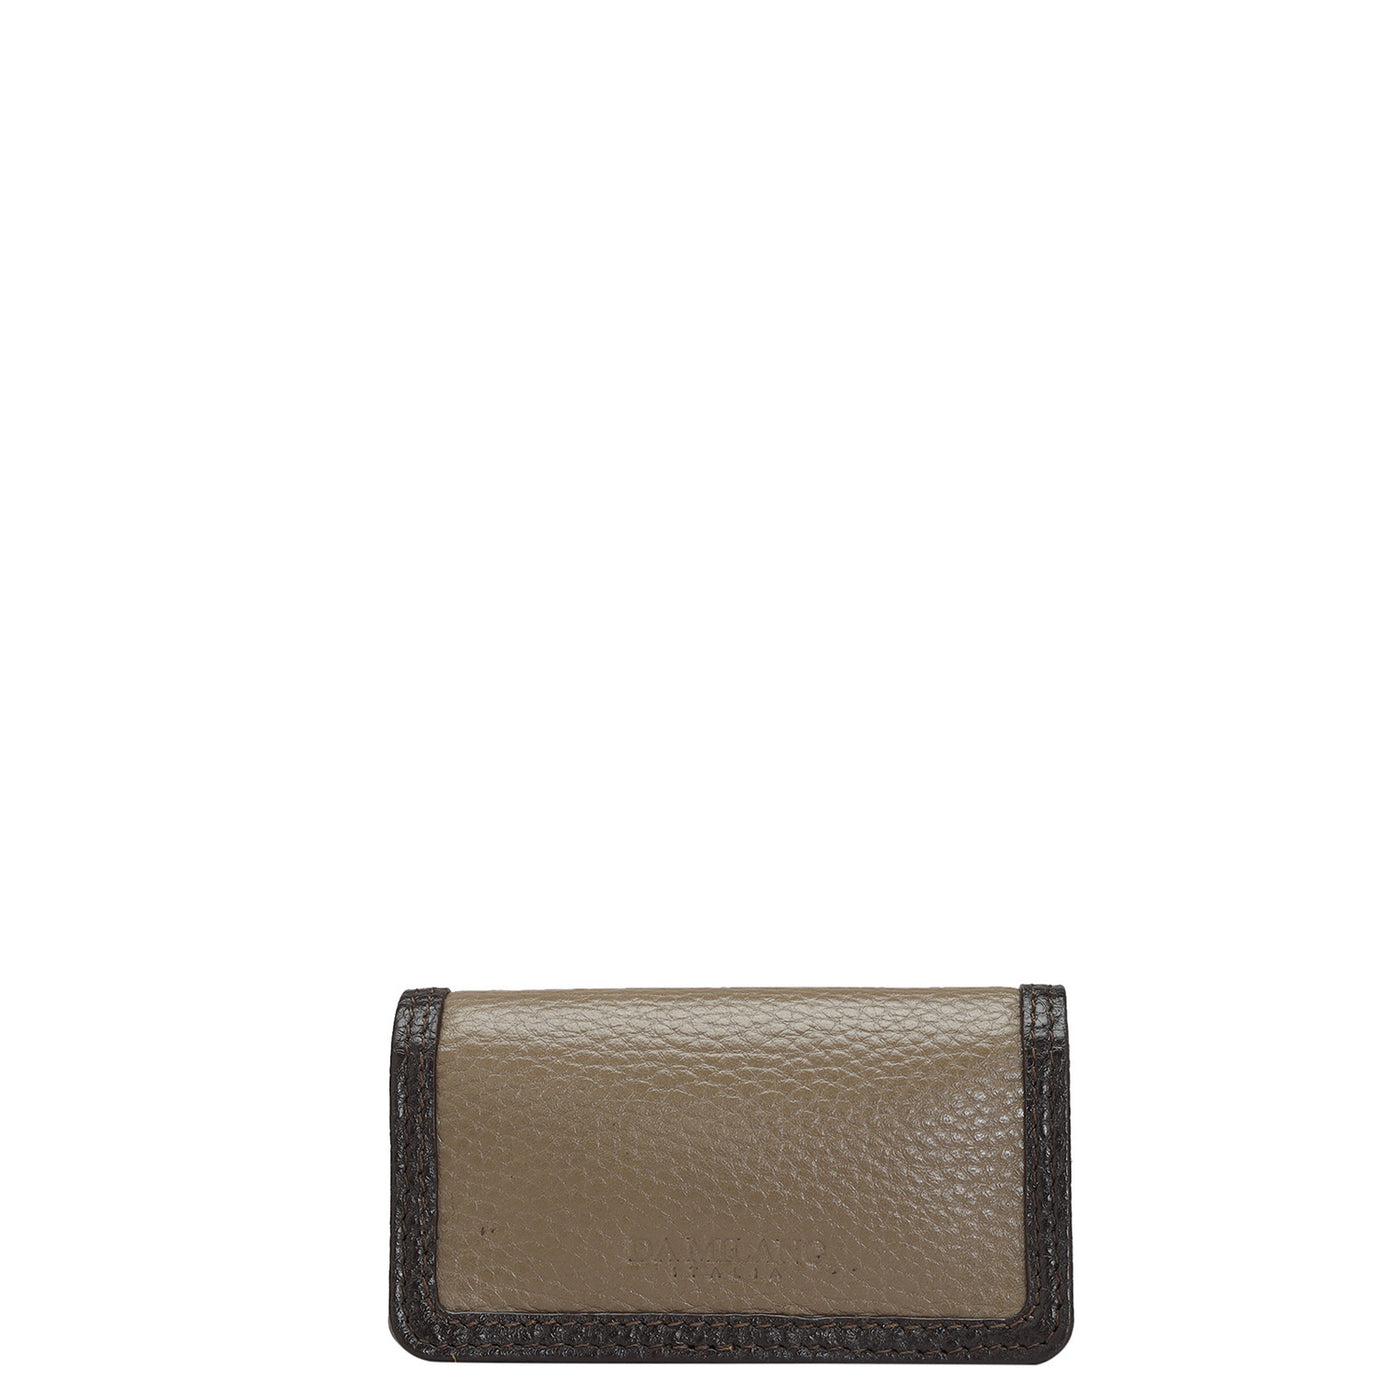 Wax Leather Lipstick Case - Taupe